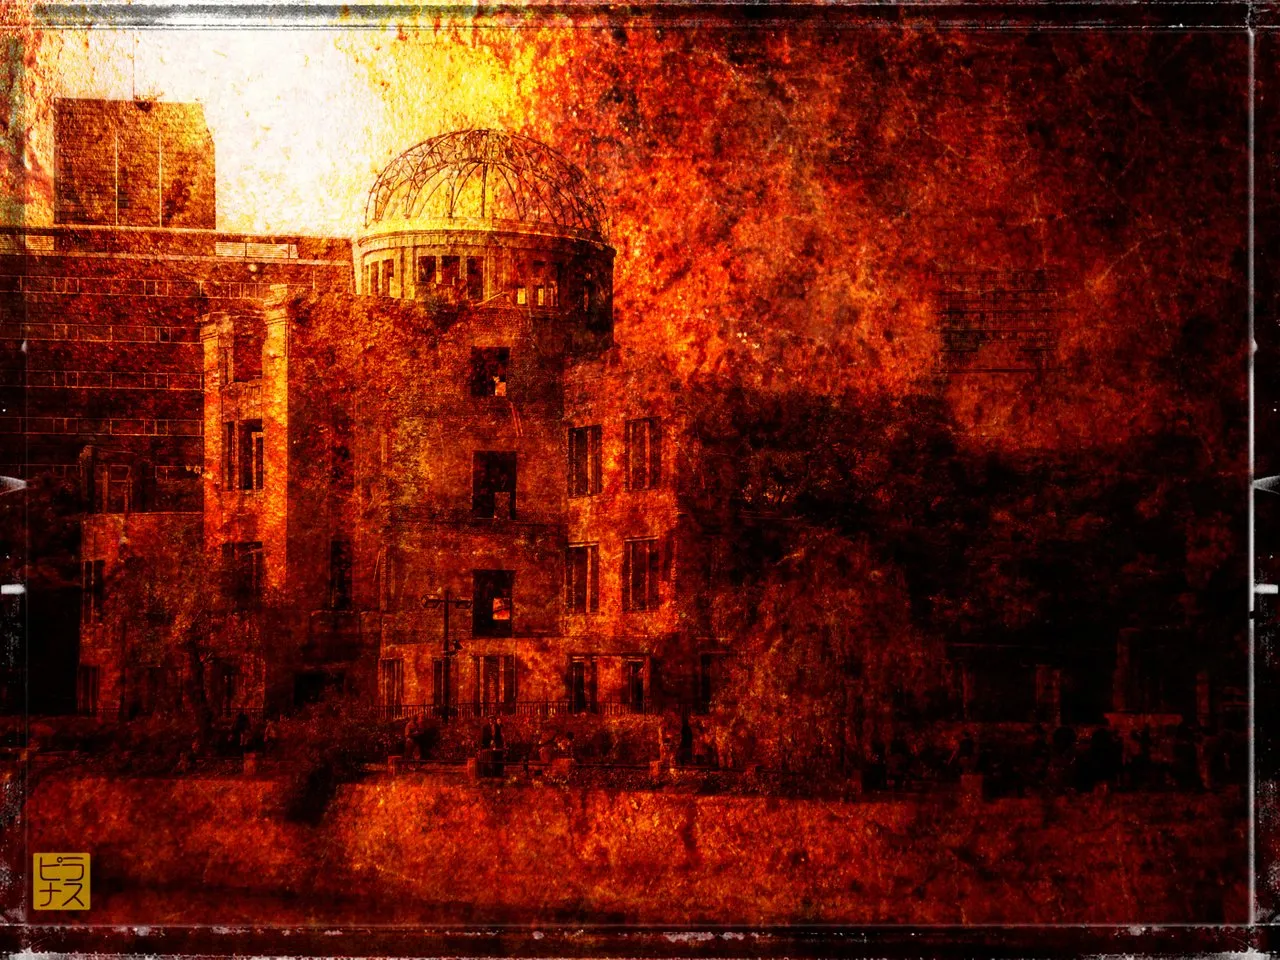 hell_s_flames_the_abomb_dome_by_david_a._laspina_copyright_2014_version_2.jpg